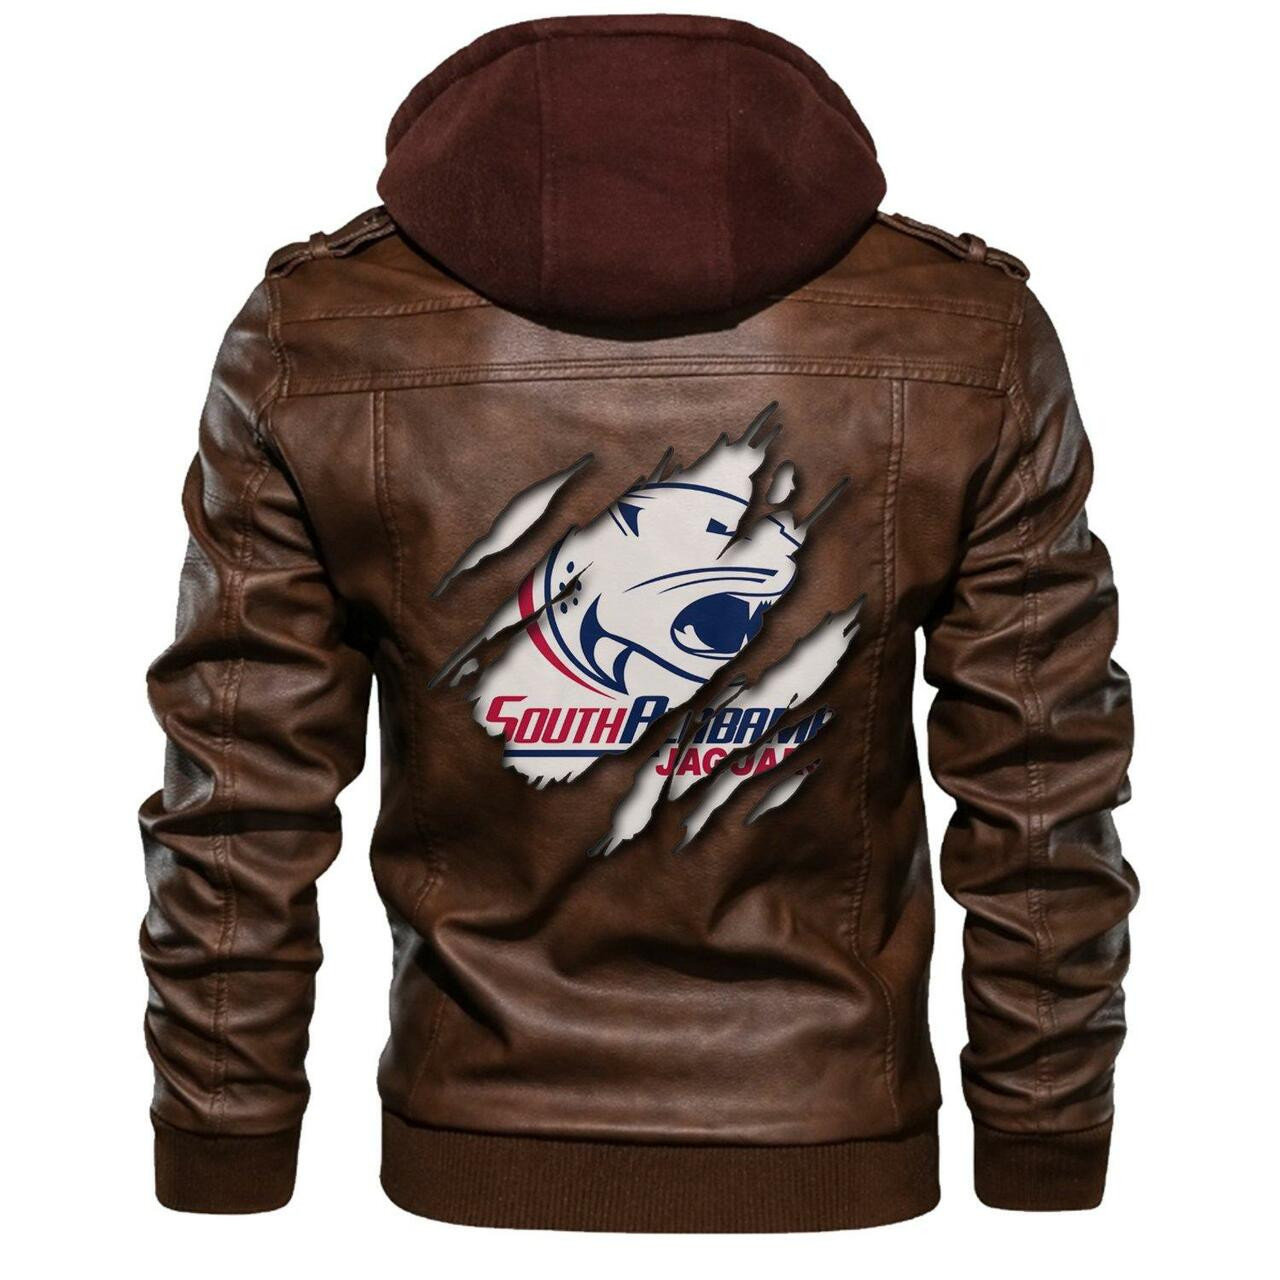 This leather Jacket will look great on you and make you stand out from the crowd 253